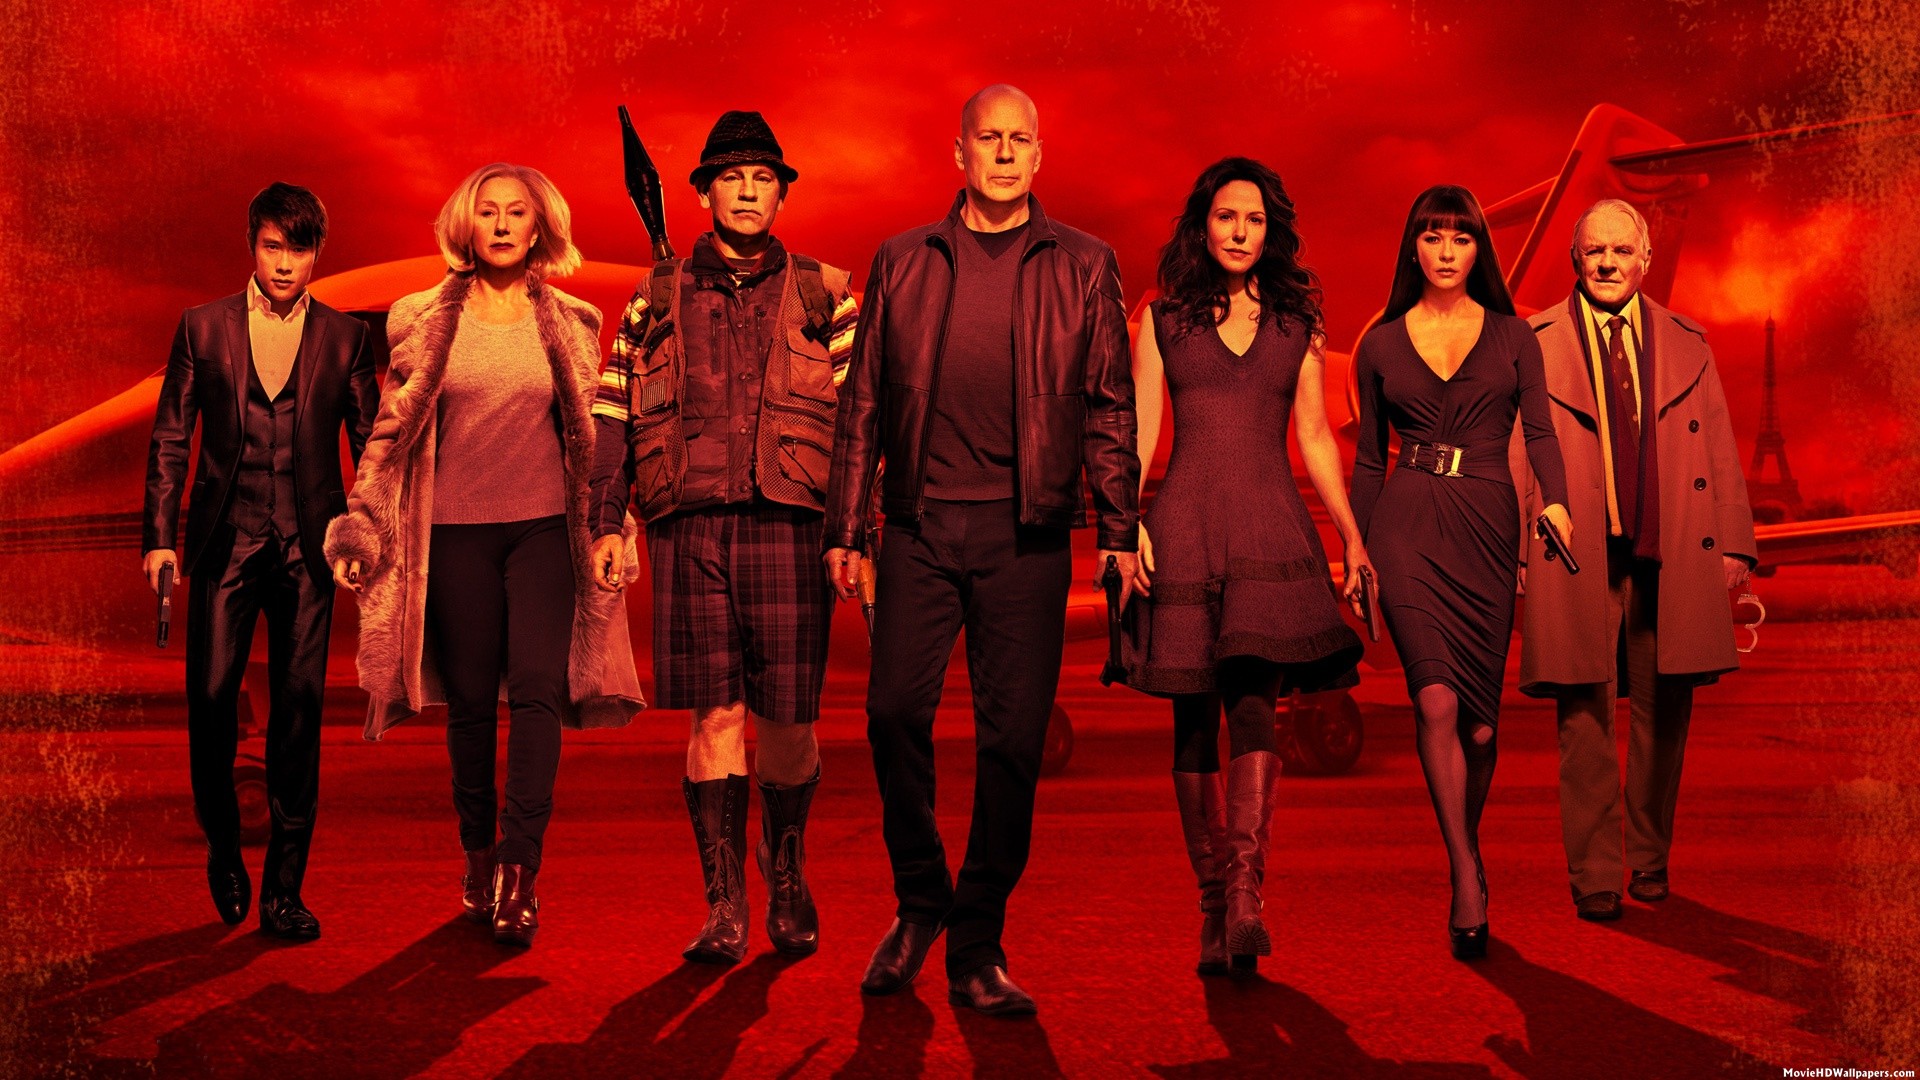 RED 2” (2013) Review – Claudia's Journal